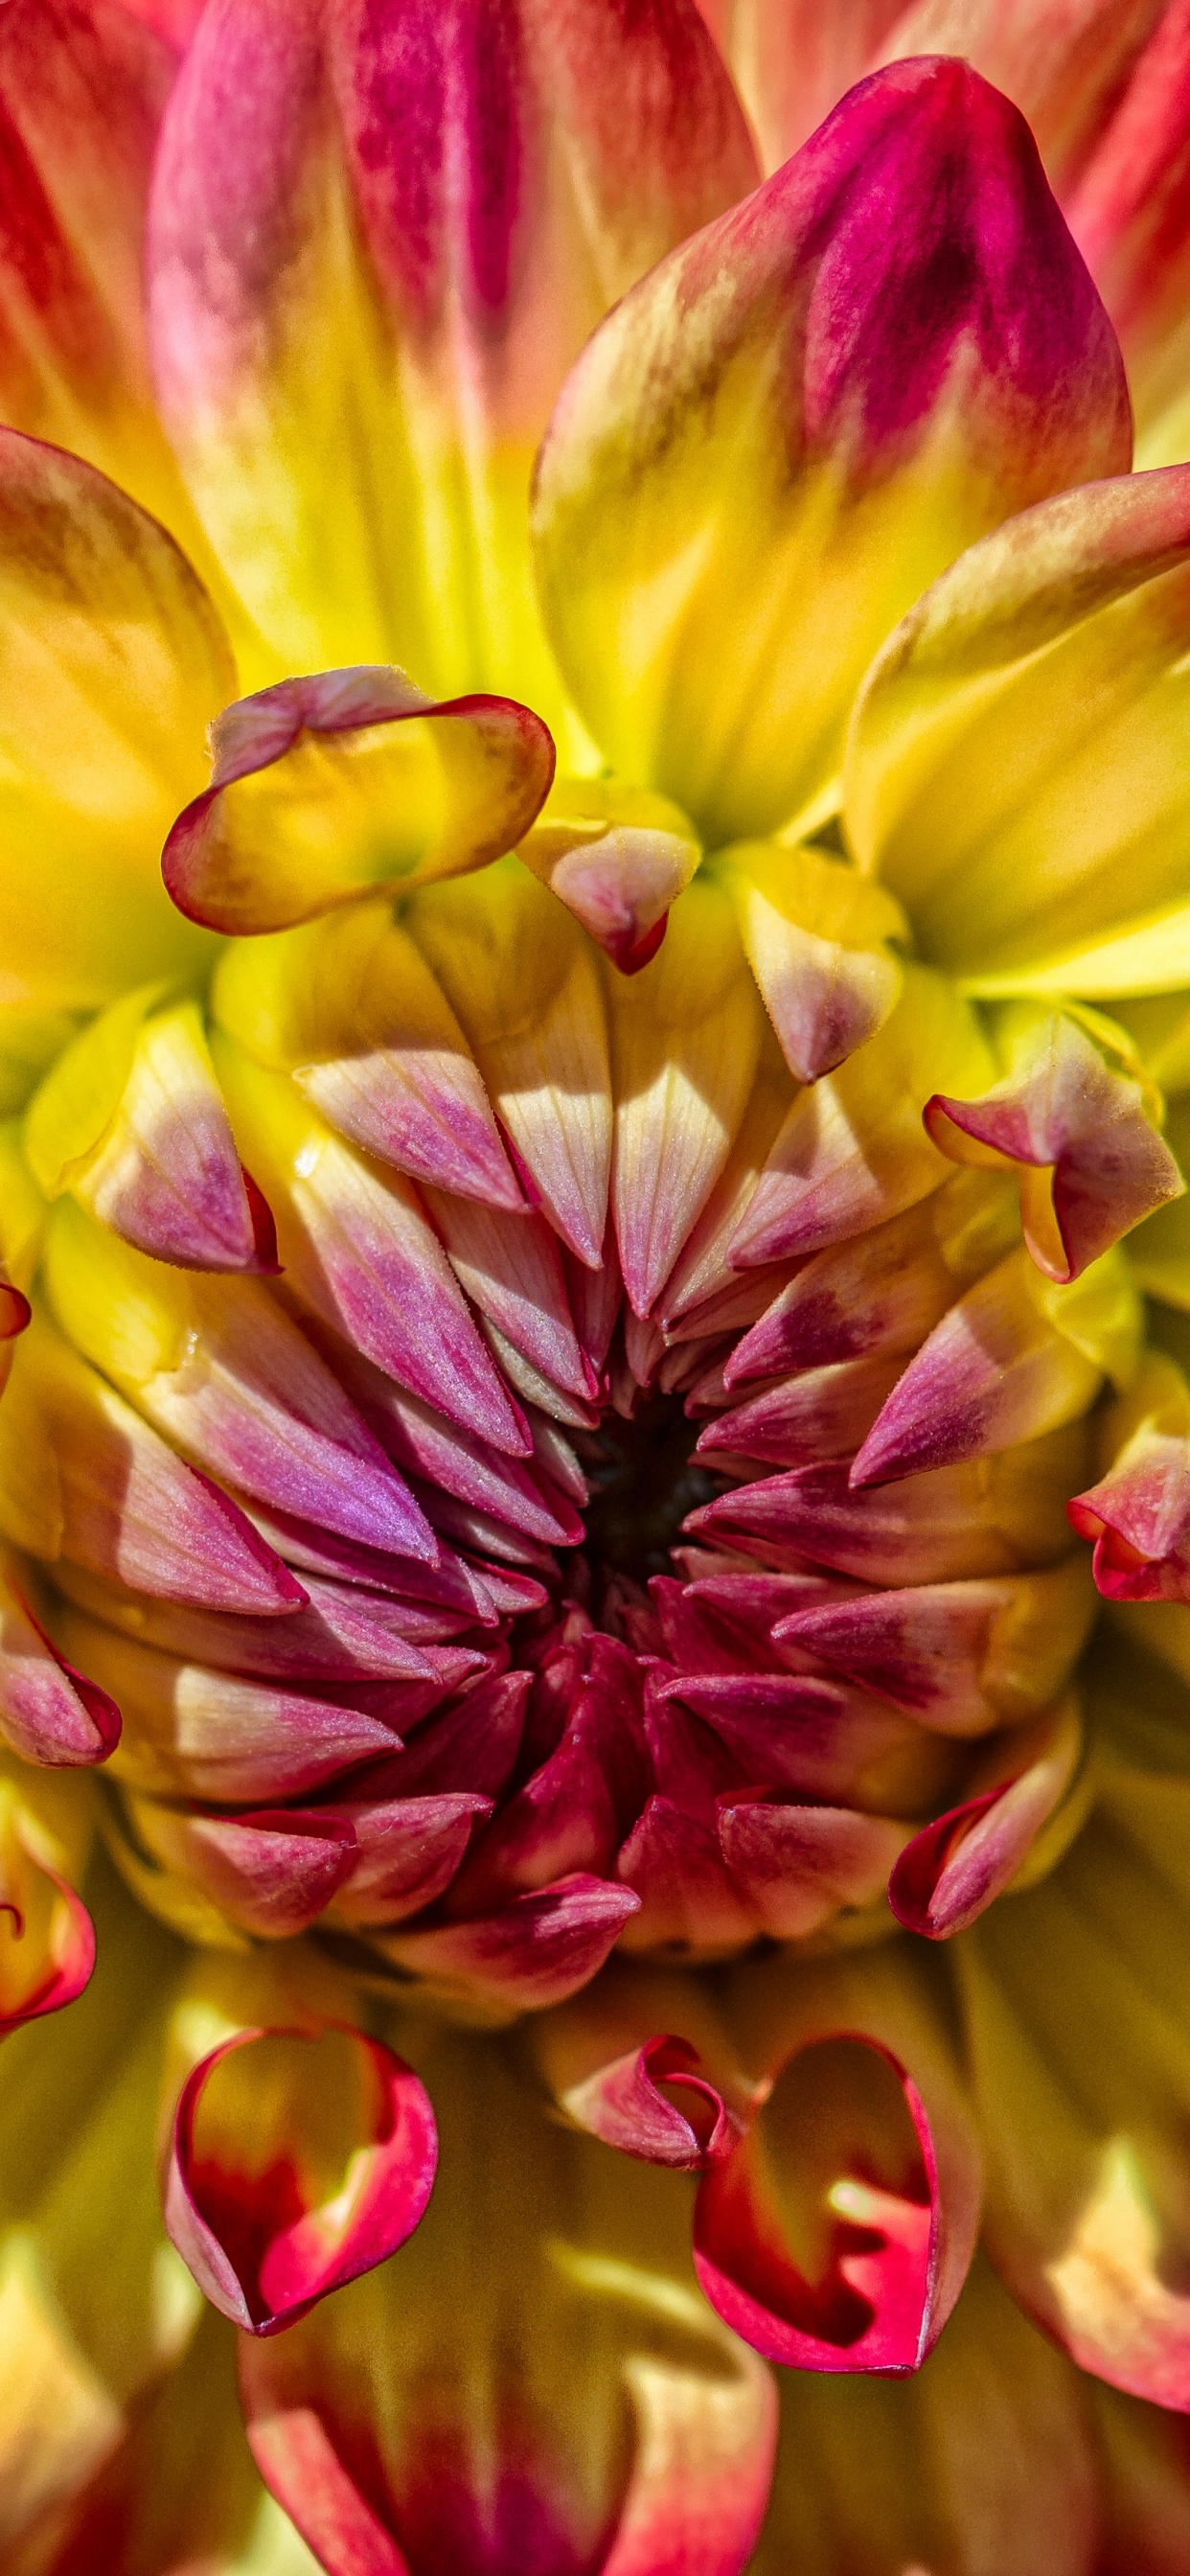 Pink and Yellow Flower in Macro Photography. Wallpaper in 1242x2688 Resolution